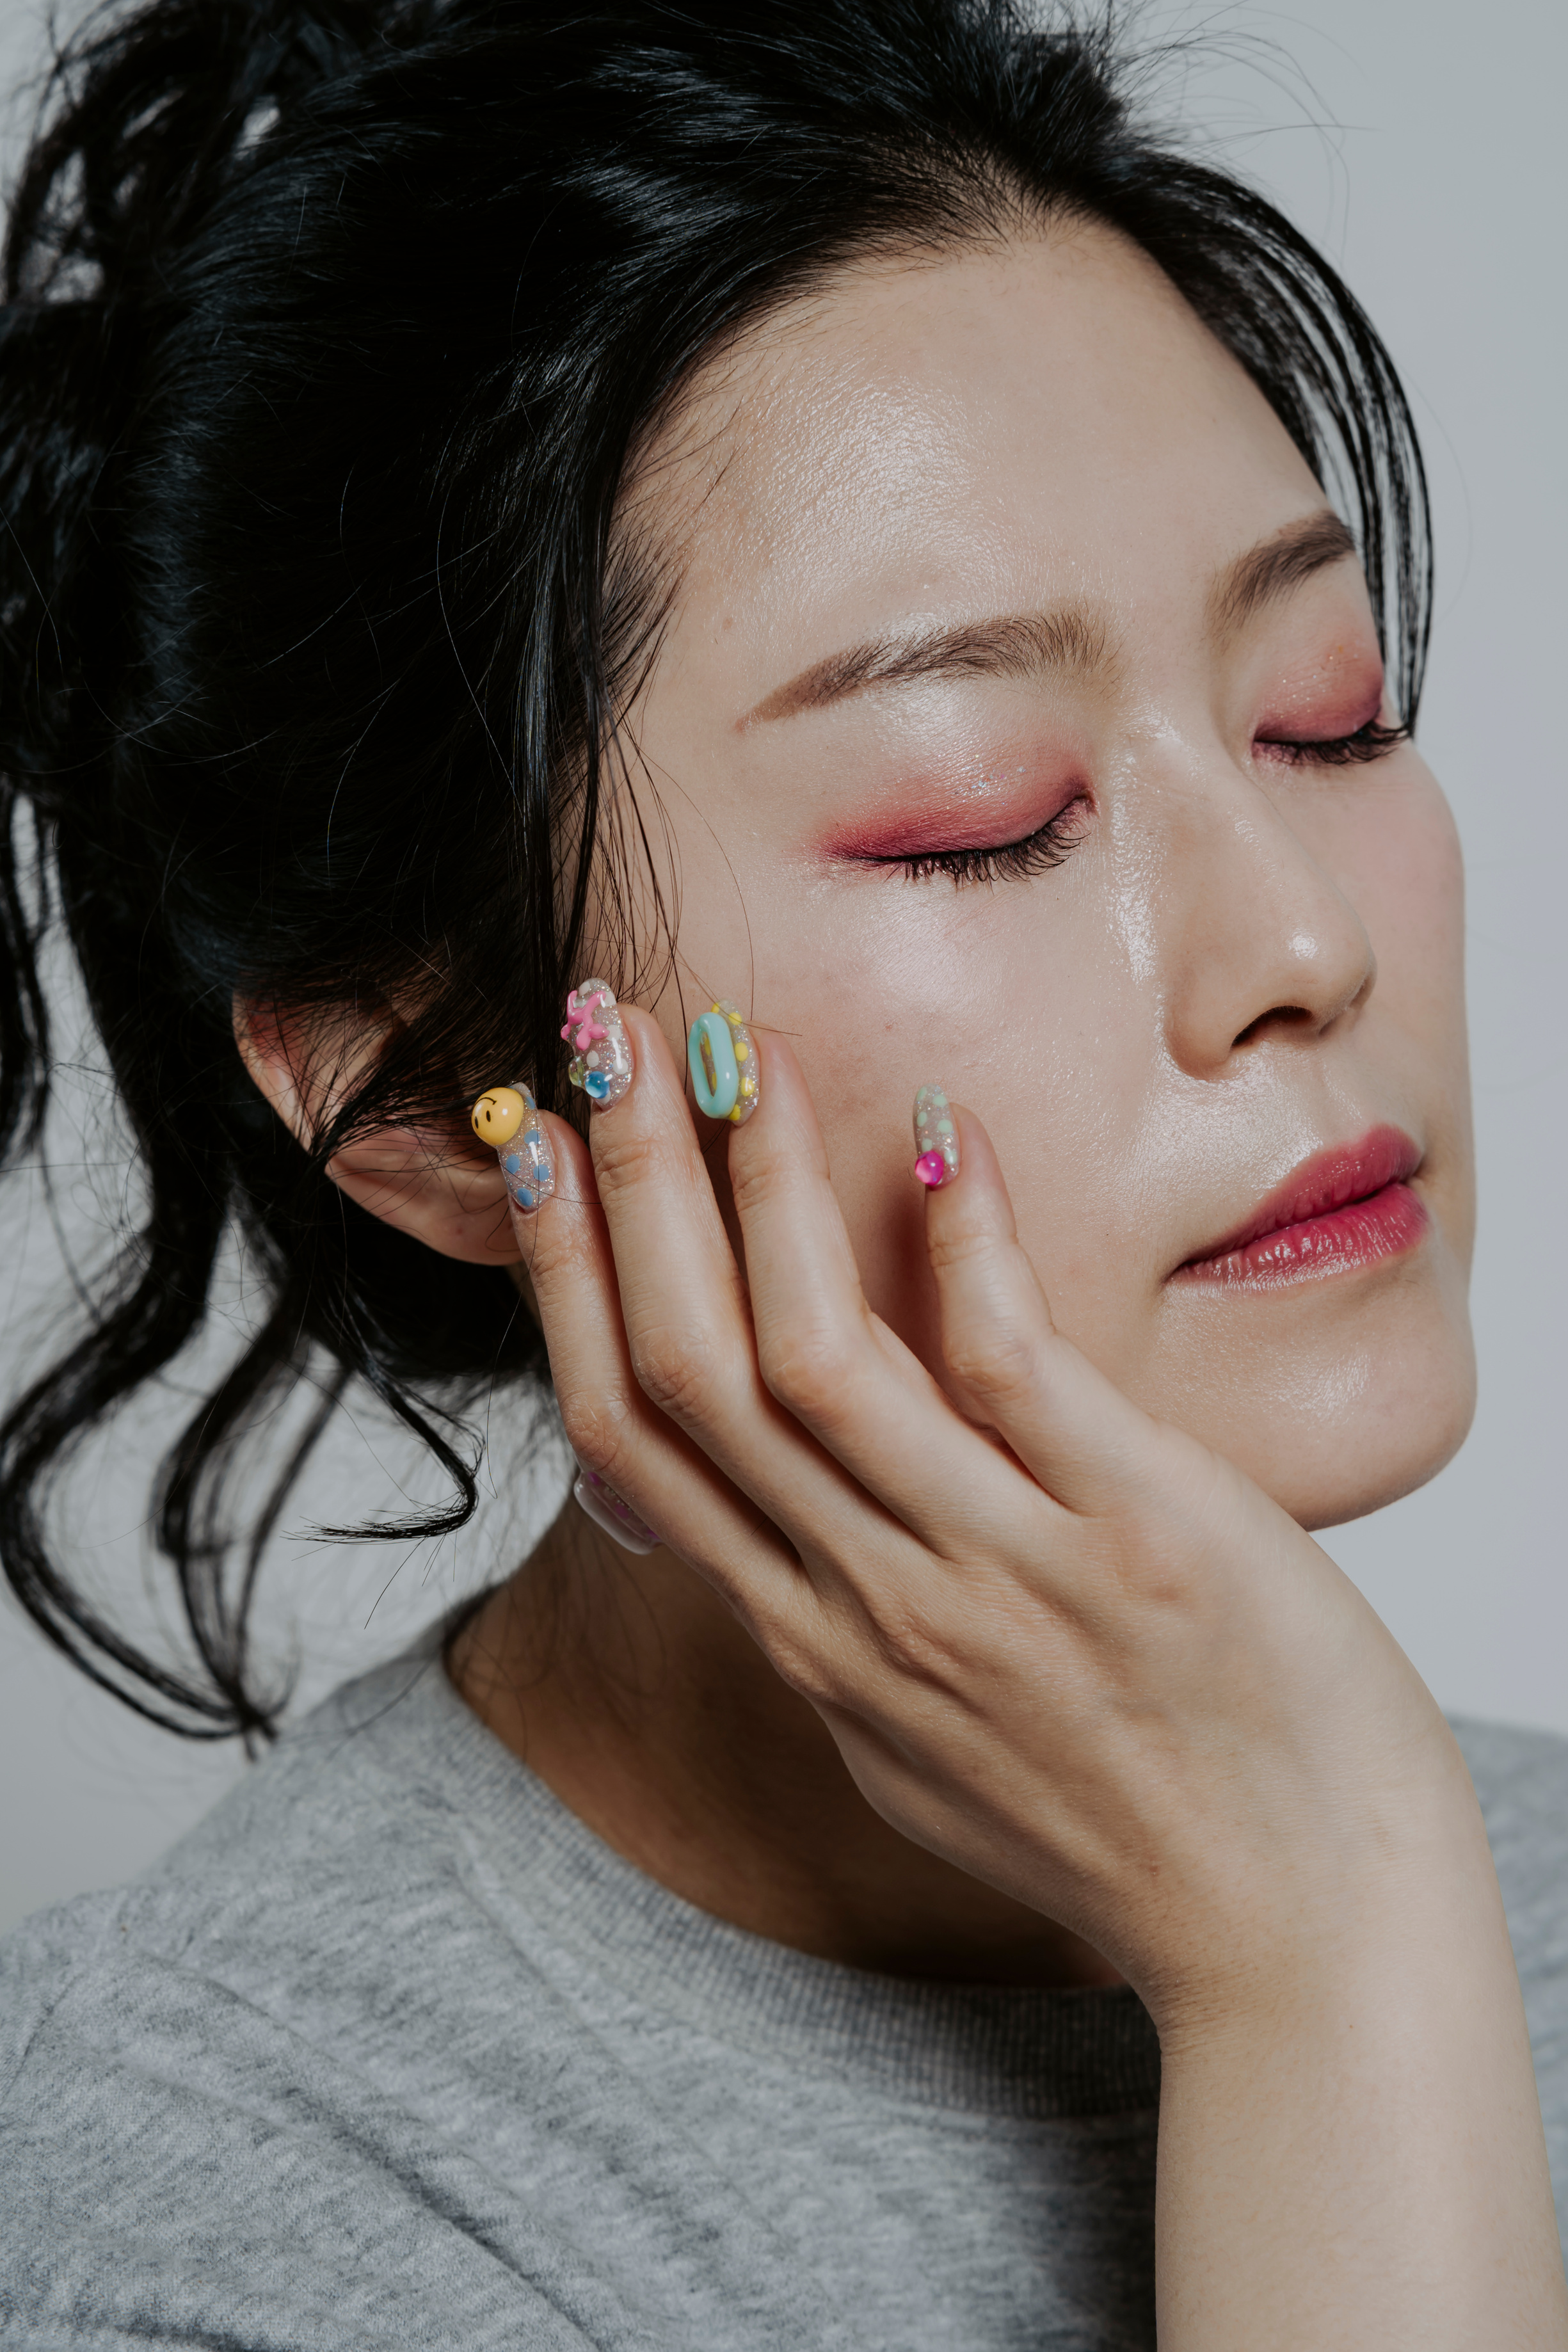 Woman with Makeup Showing Nail Art